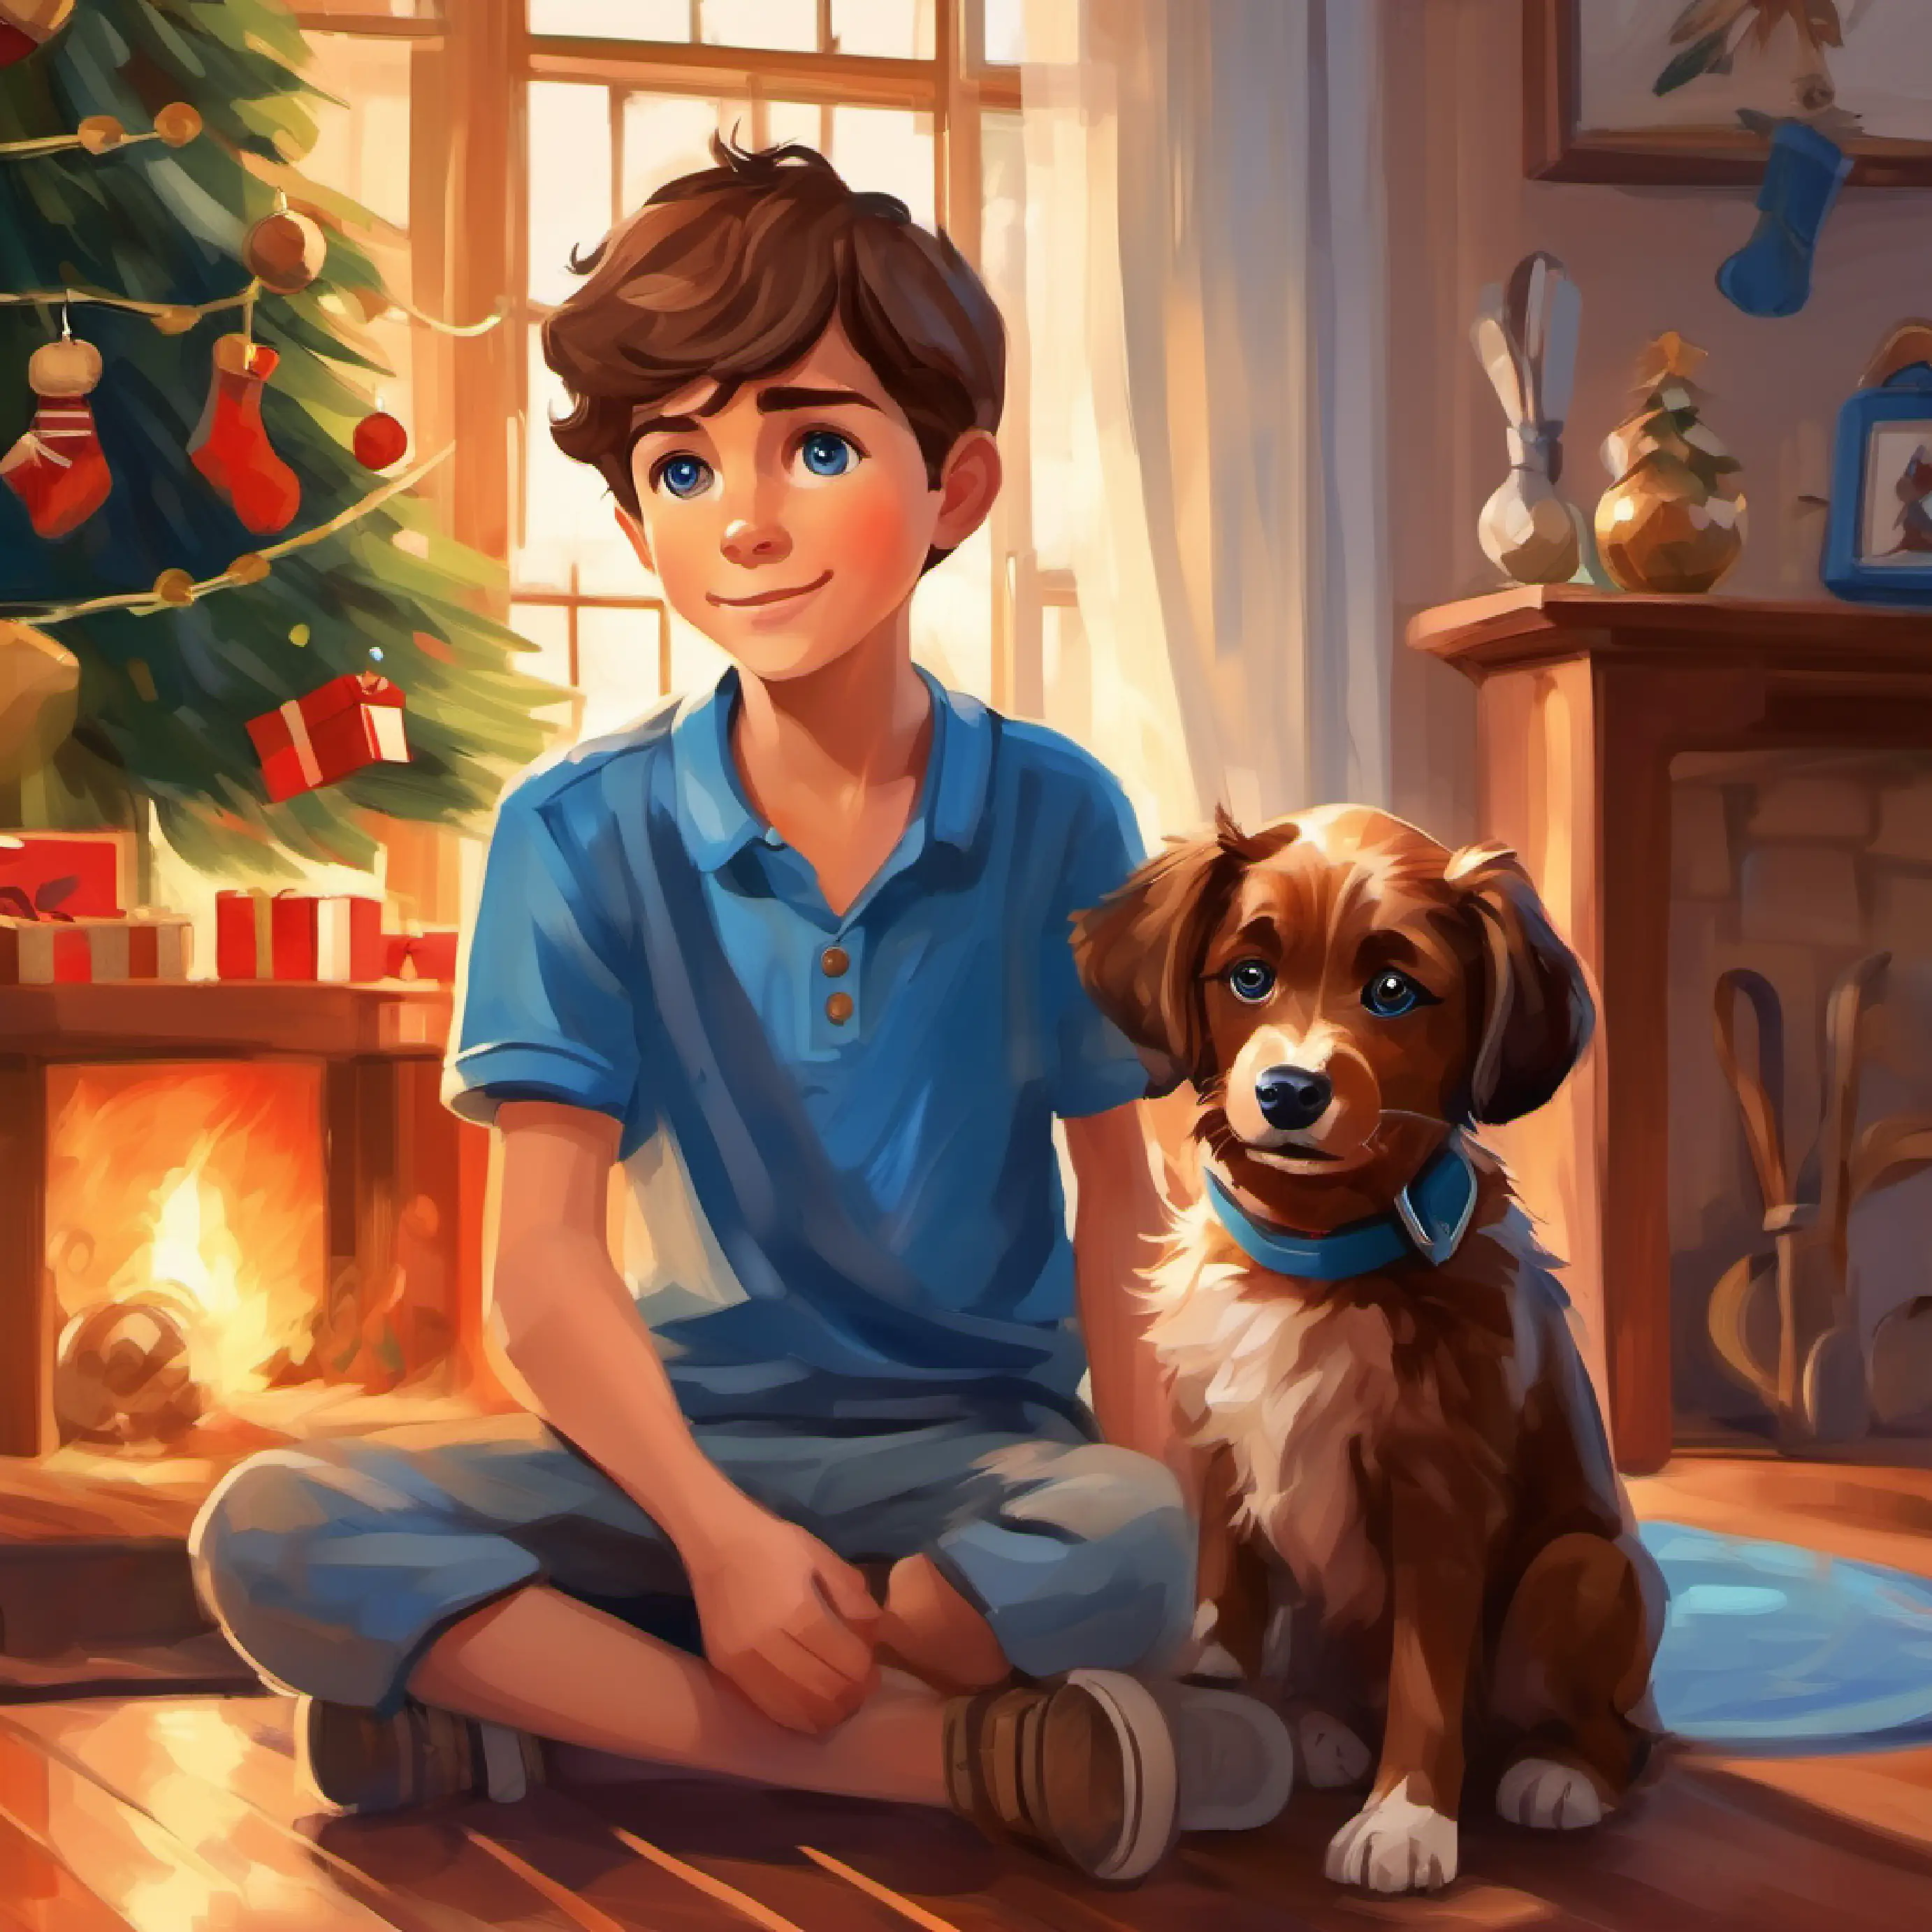 Introduction to characters, A young boy with brown hair and blue eyes and his dog A small, playful dog with brown fur, at home.